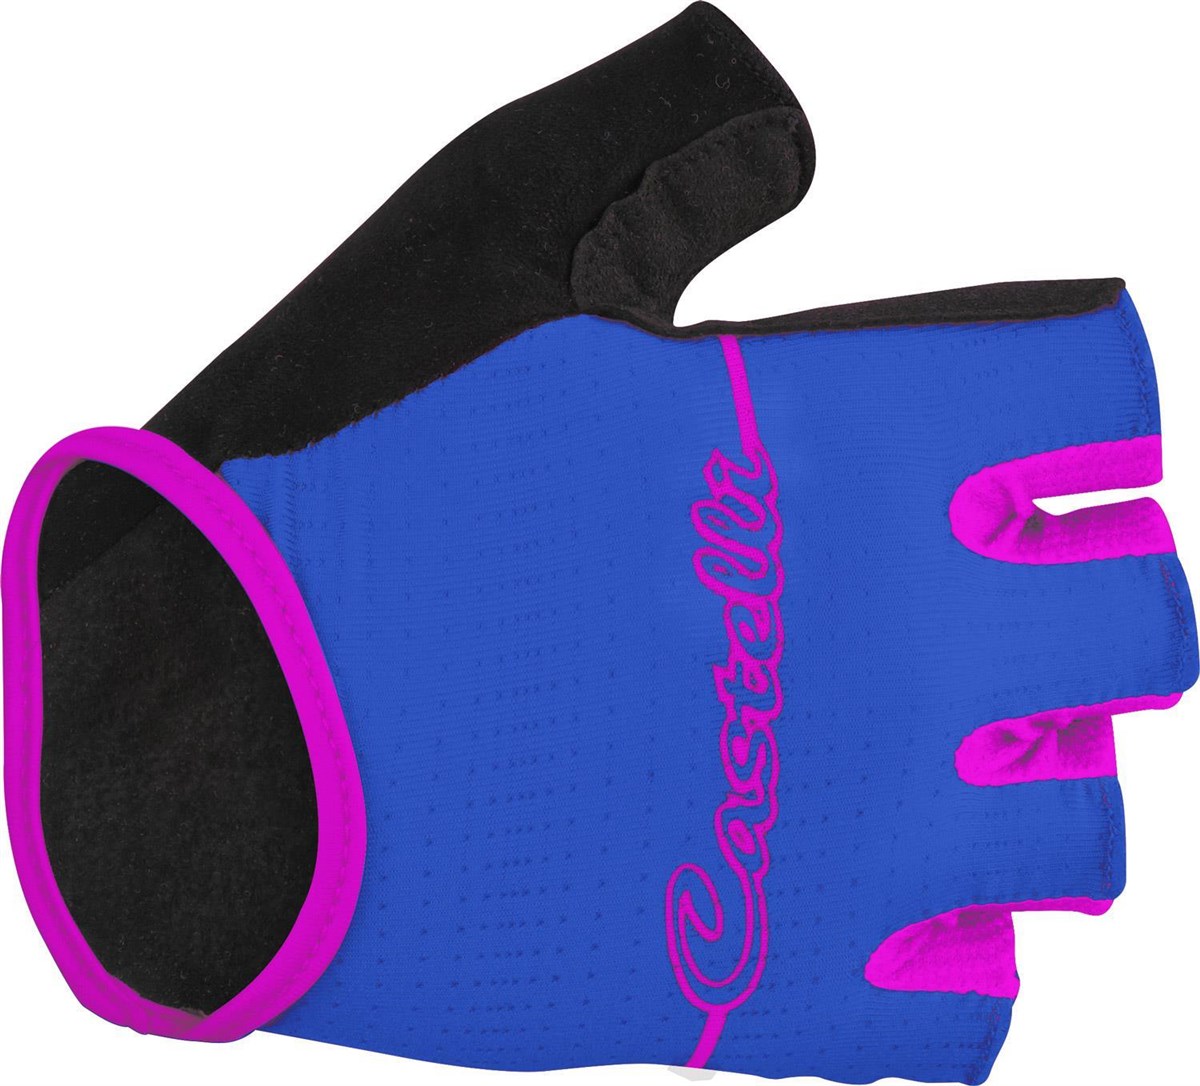 Castelli Dolcissima Womens Short Finger Cycling Gloves product image